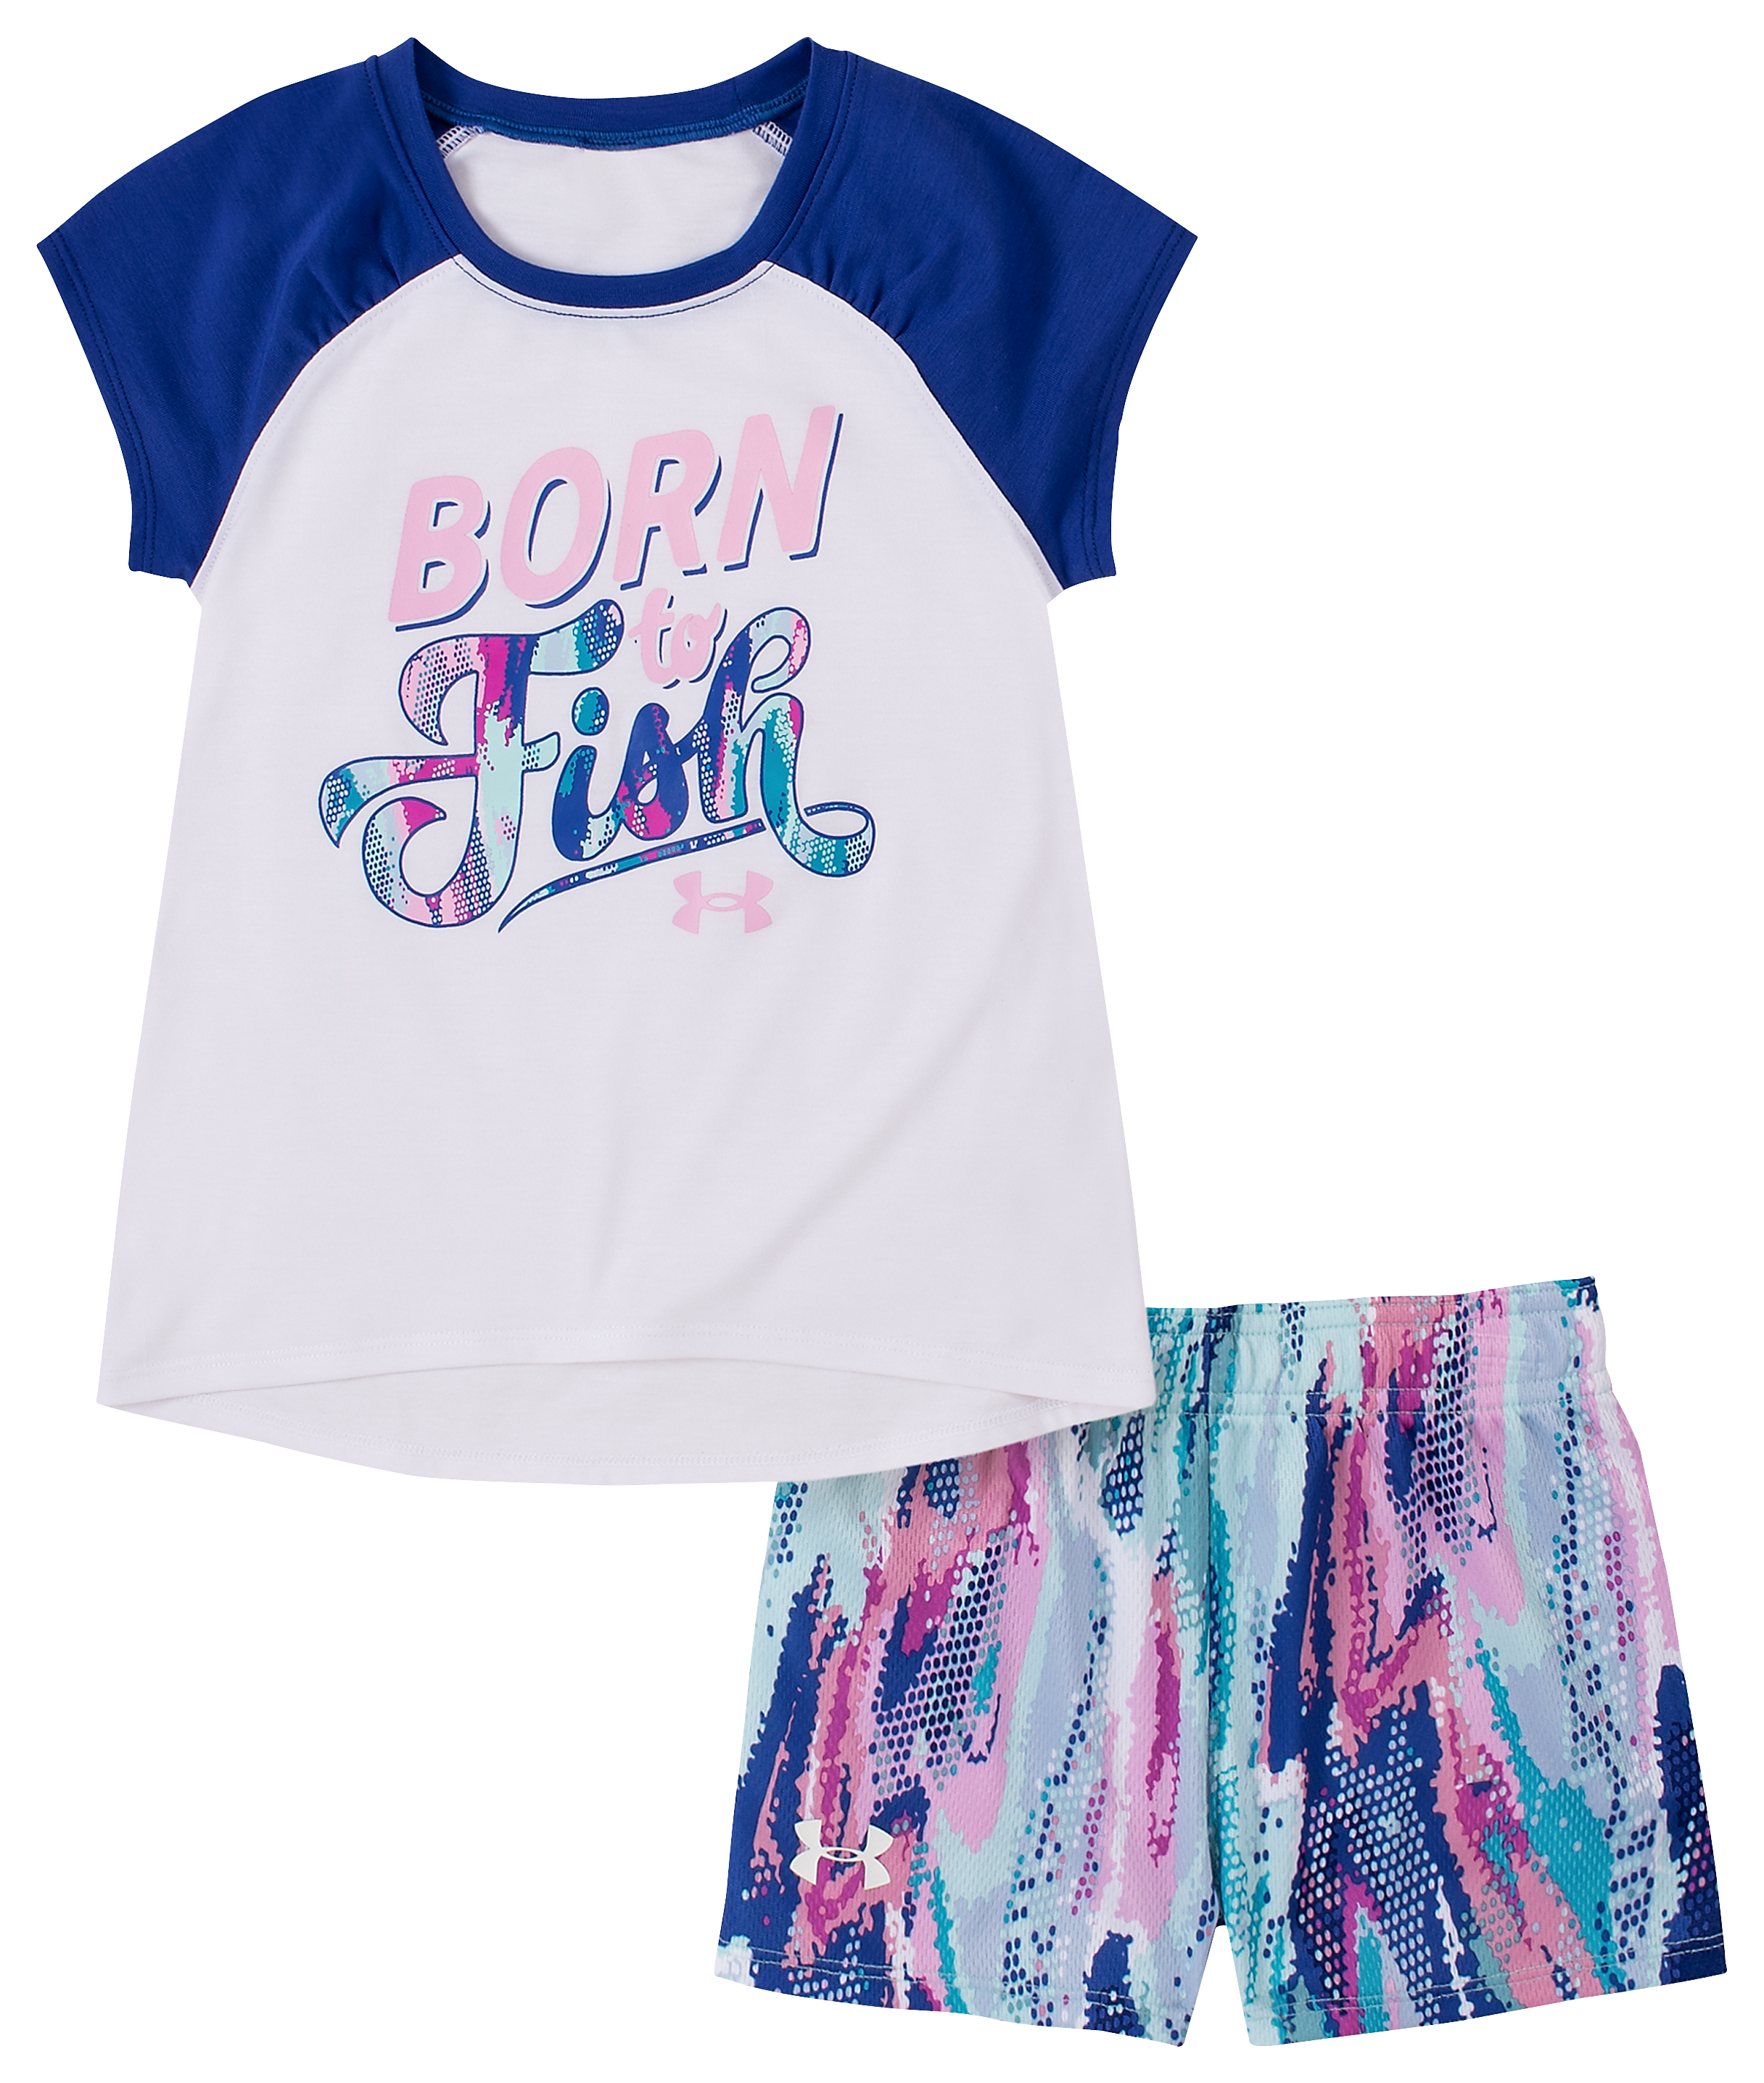 Under Armour Born to Fish Raglan Short-Sleeve T-Shirt and Shorts Set for  Babies, Toddlers or Kids